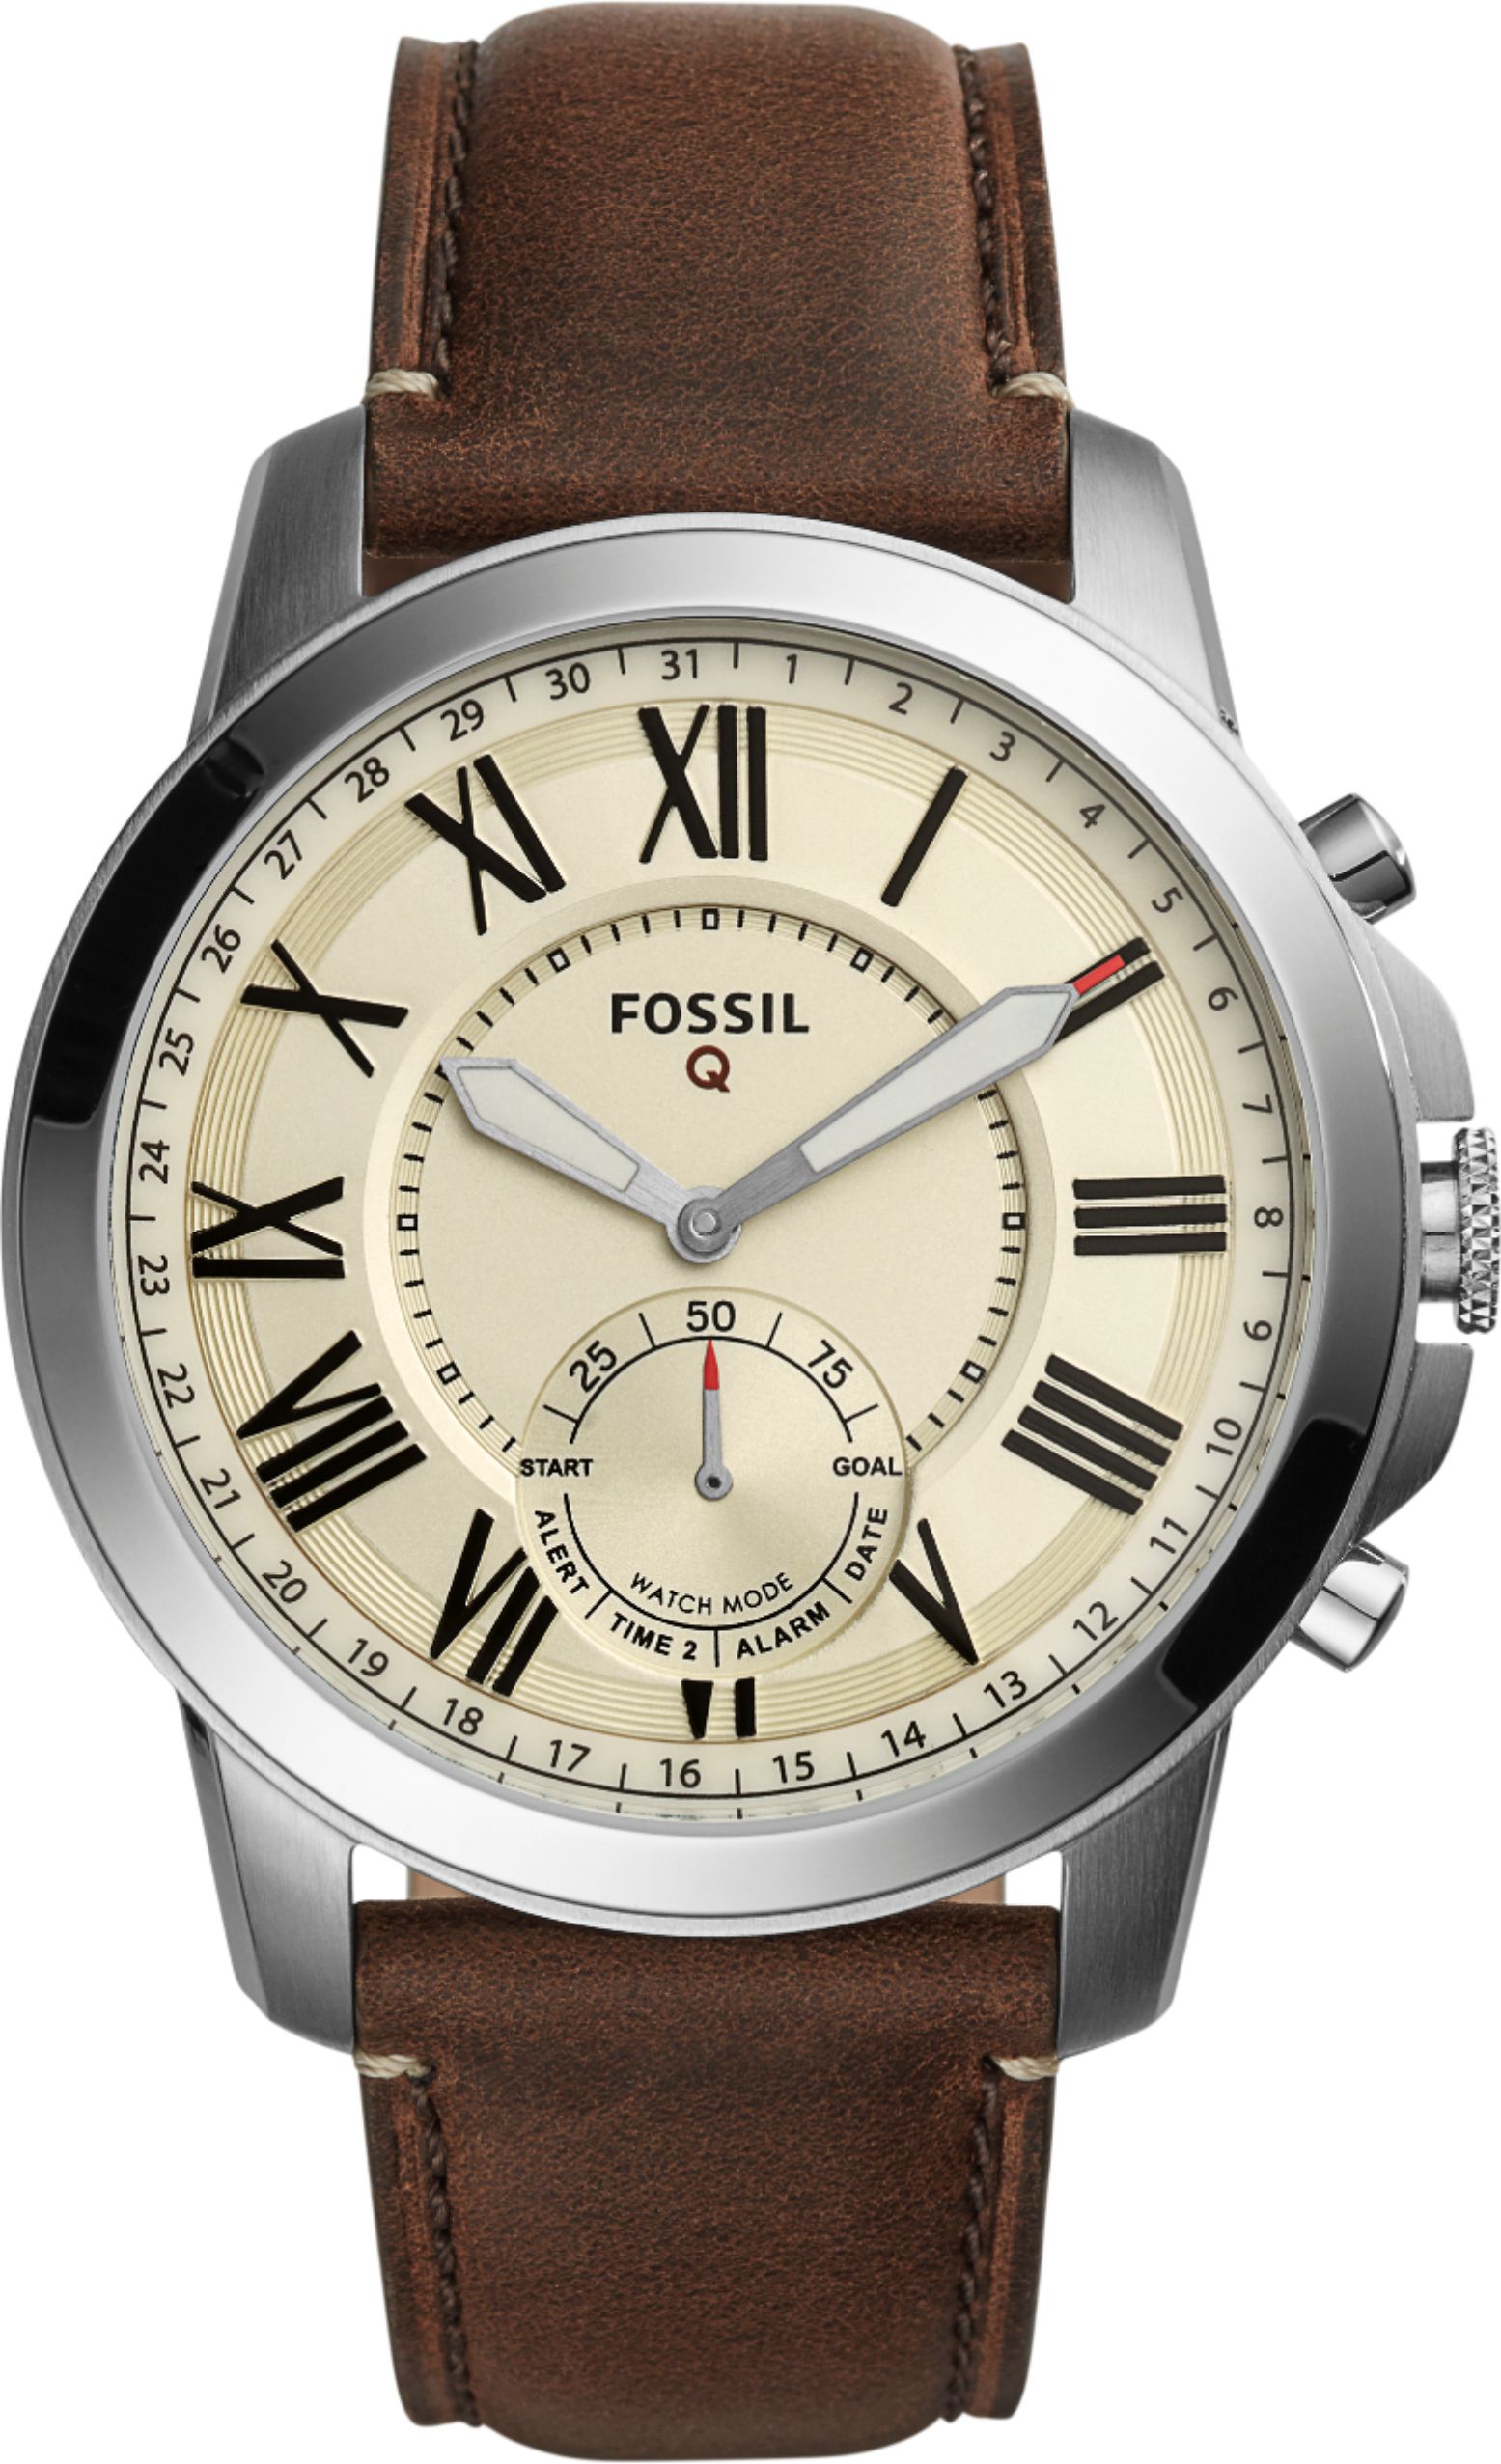 Customer Reviews: Fossil Q Grant Hybrid Smartwatch 44mm Silver FTW1118 ...